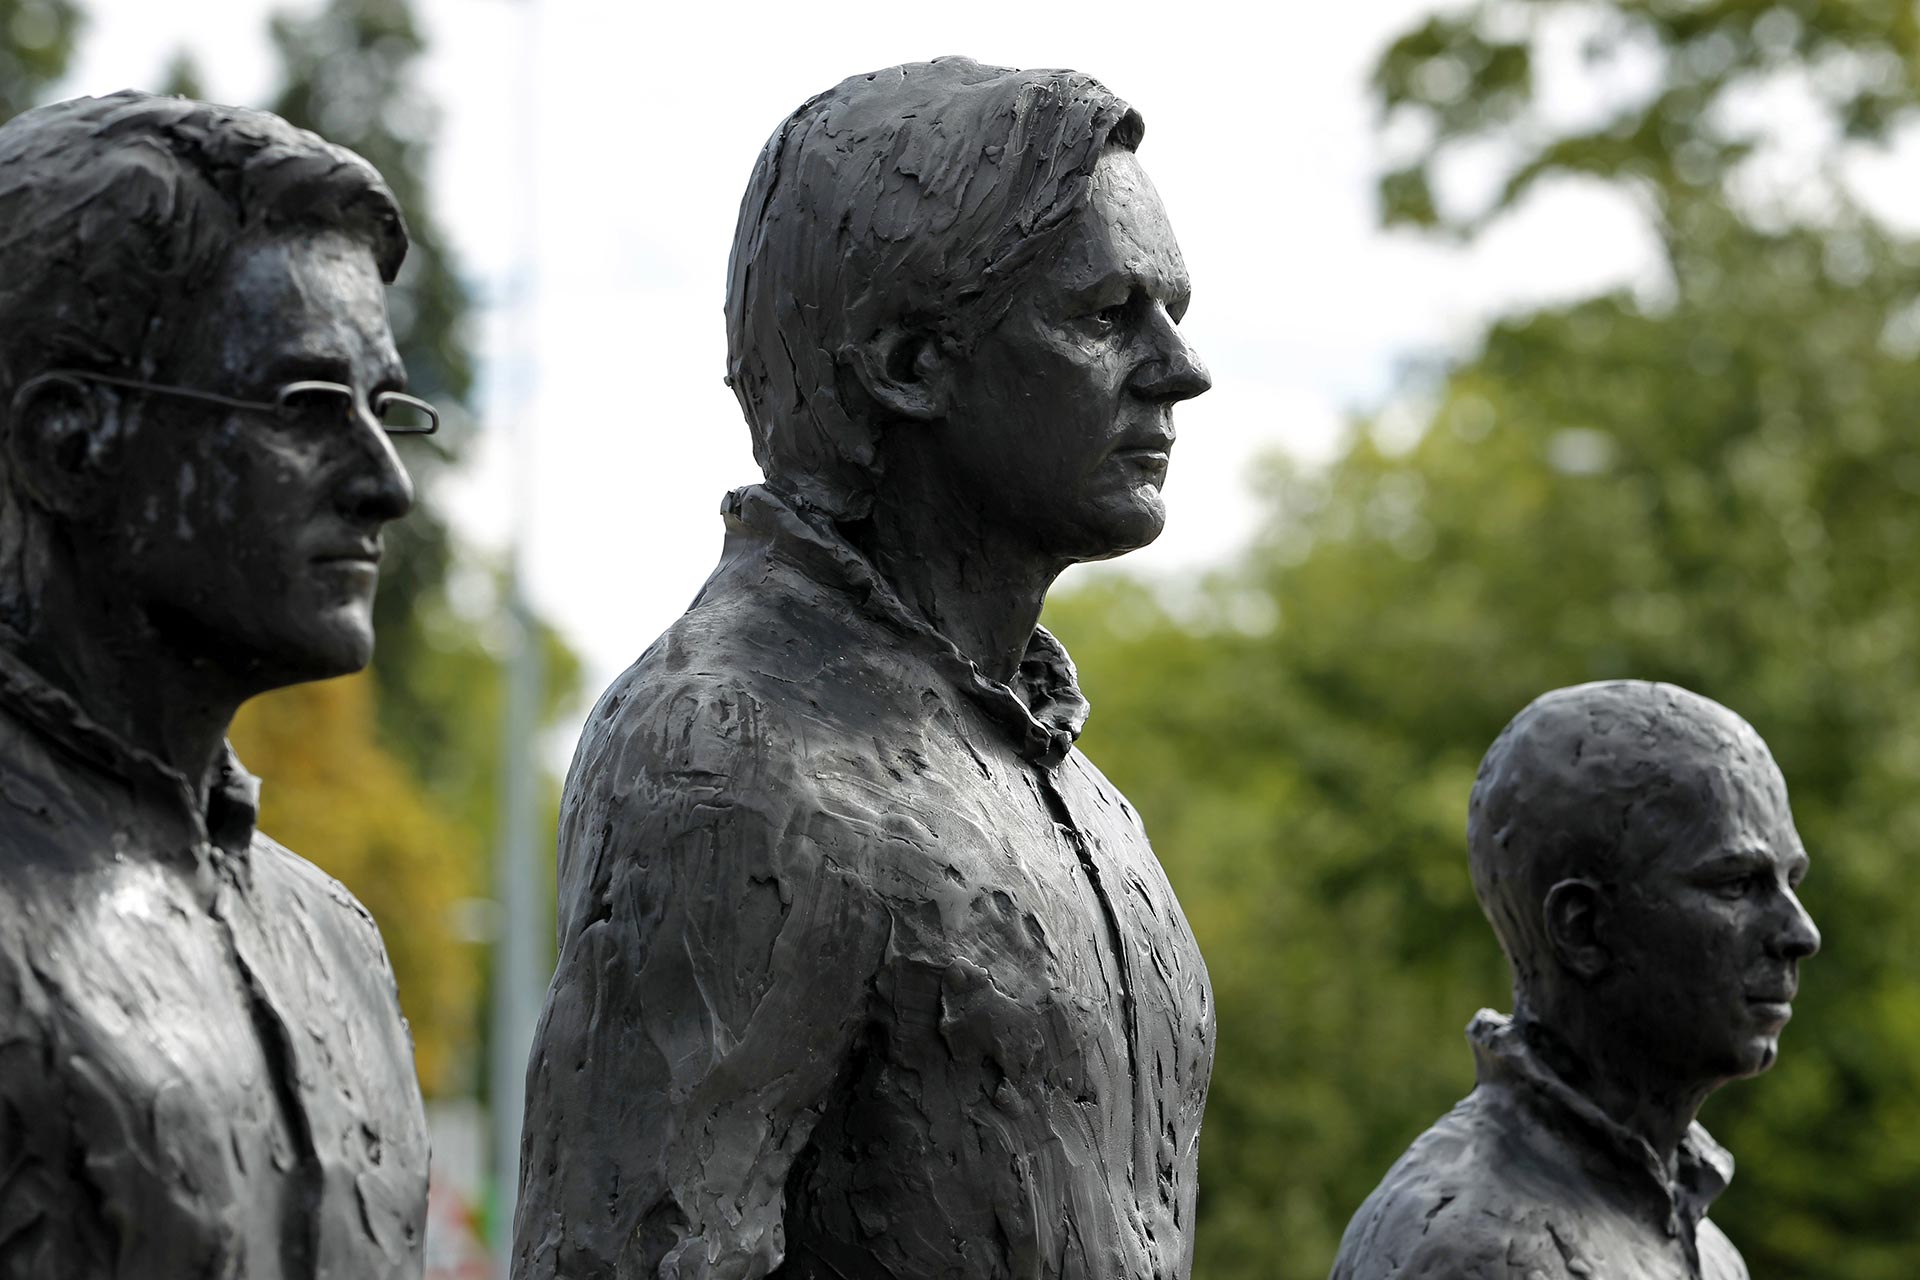 Whistleblowers Edward Snowden, Julian Assange and Chelsea Manning depicted in an art installation entitled “Anything to Say?” in an art installation outside the U.N. European headquarters in Geneva, Switzerland, in 2015. (Credit: Pierre Albouy/Reuters)